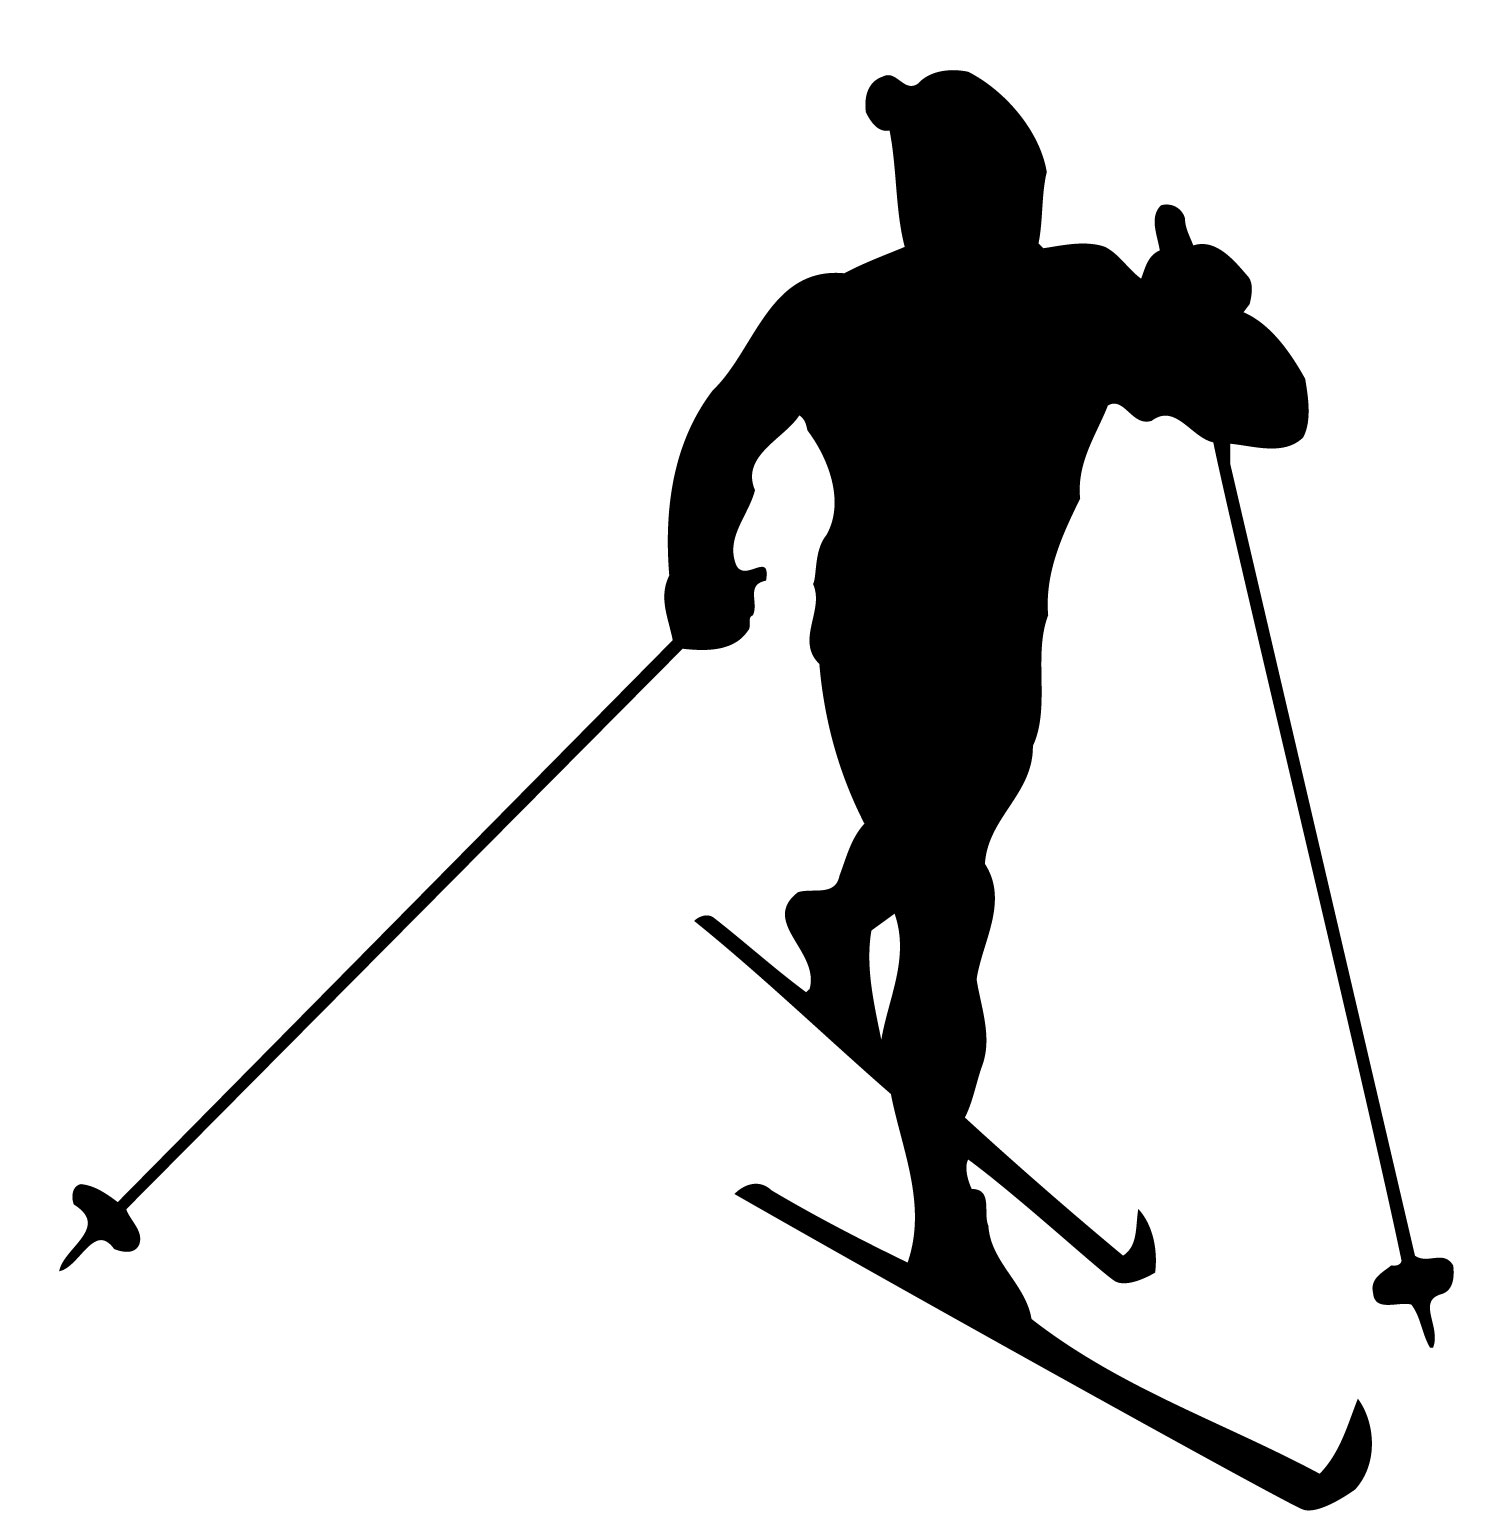 Nordic skiing clipart